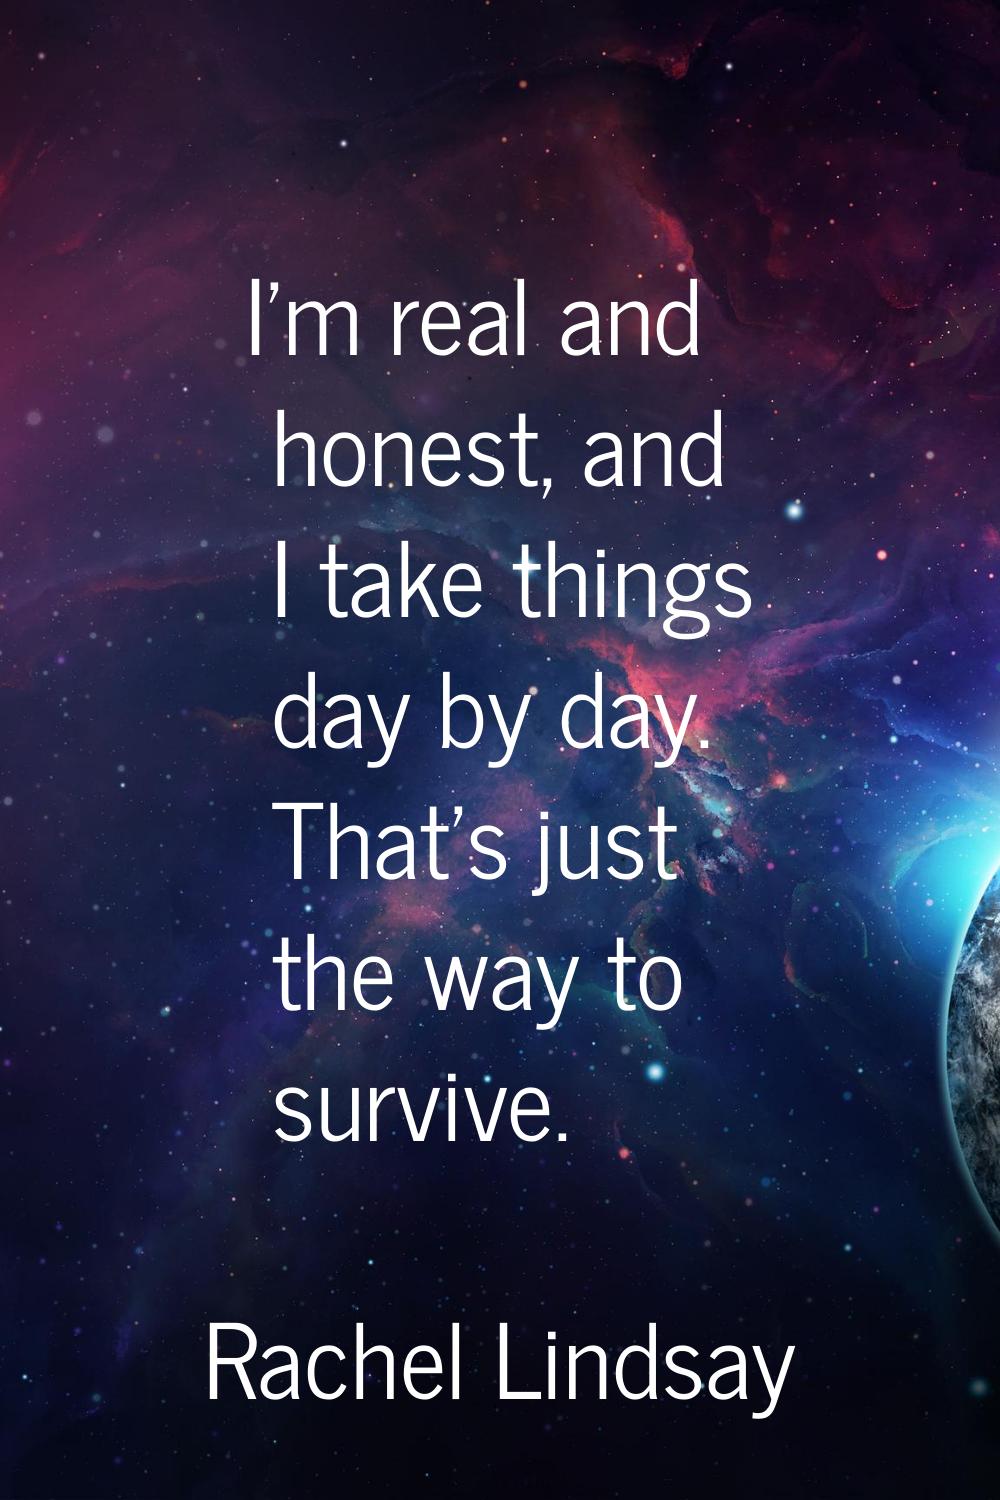 I'm real and honest, and I take things day by day. That's just the way to survive.